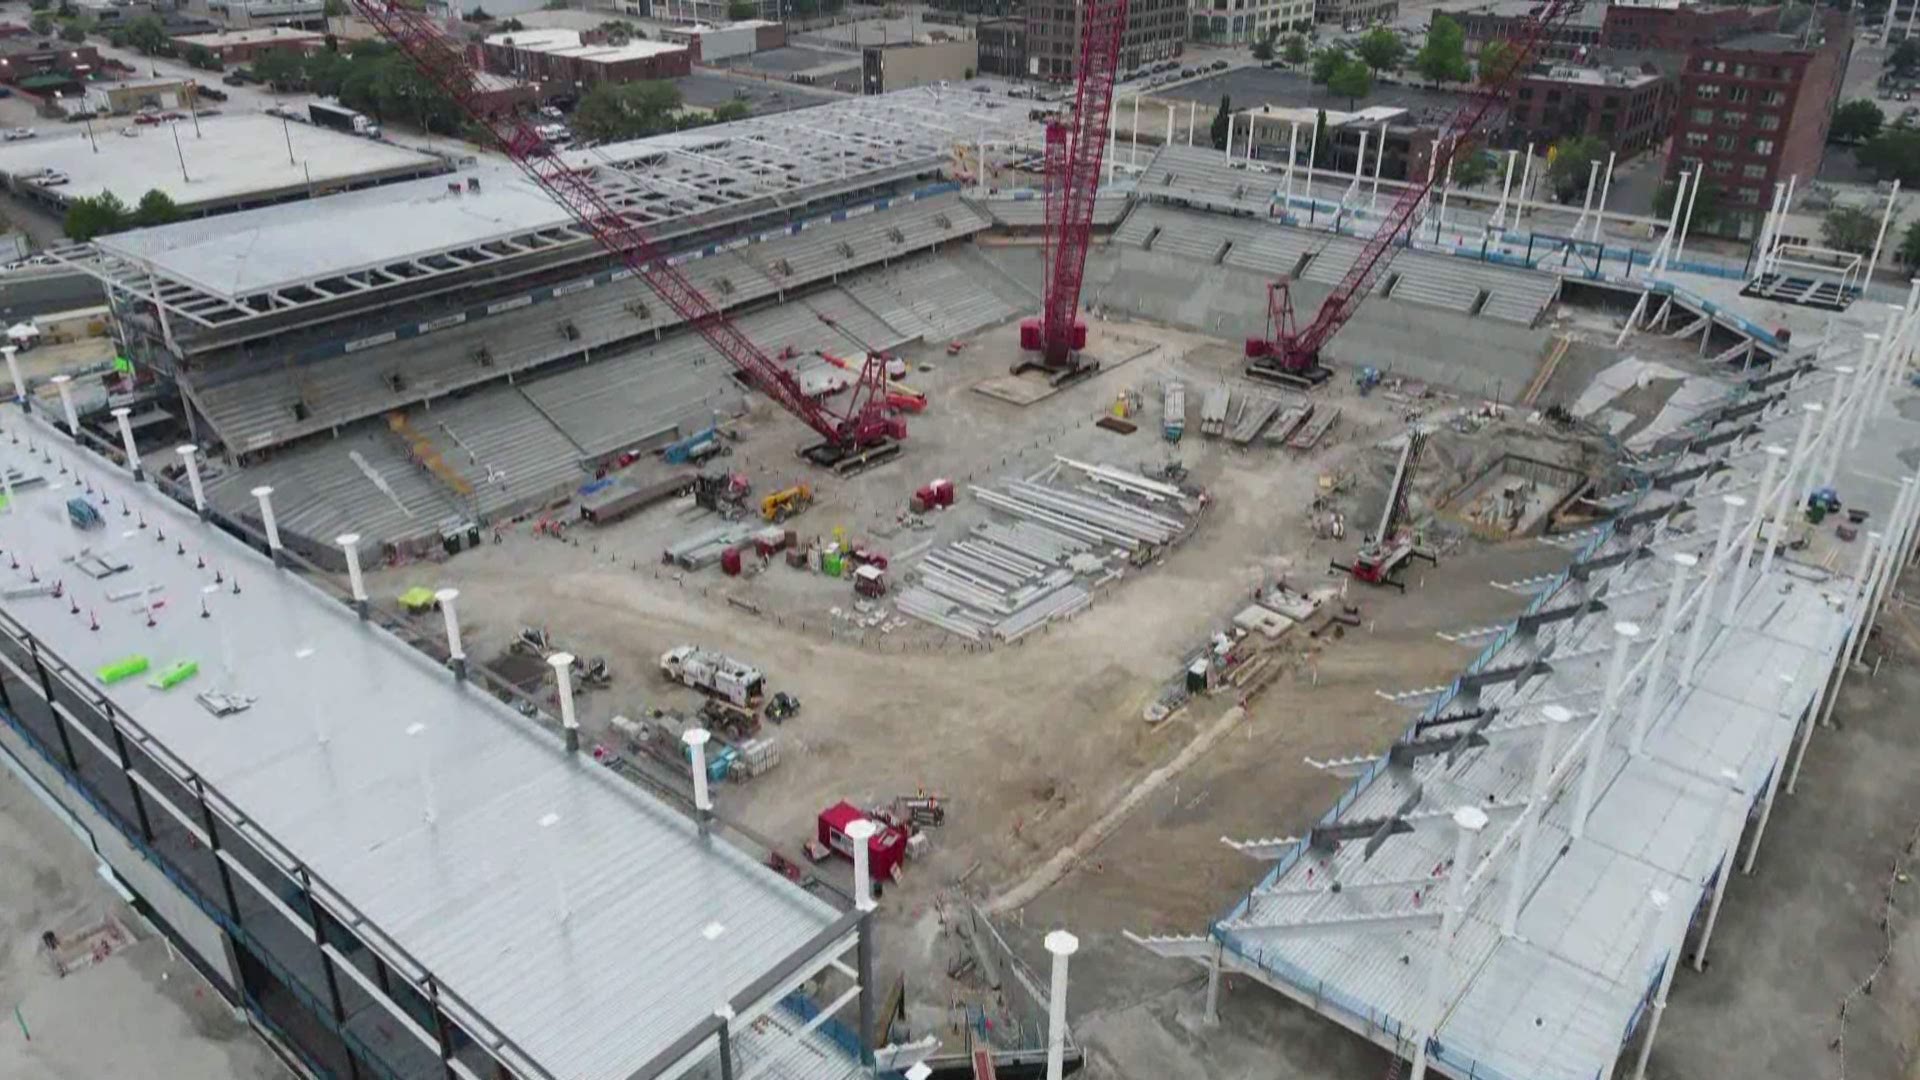 The 5 On Your Side drone captured footage of the stadium, which will seat 22,500 fans